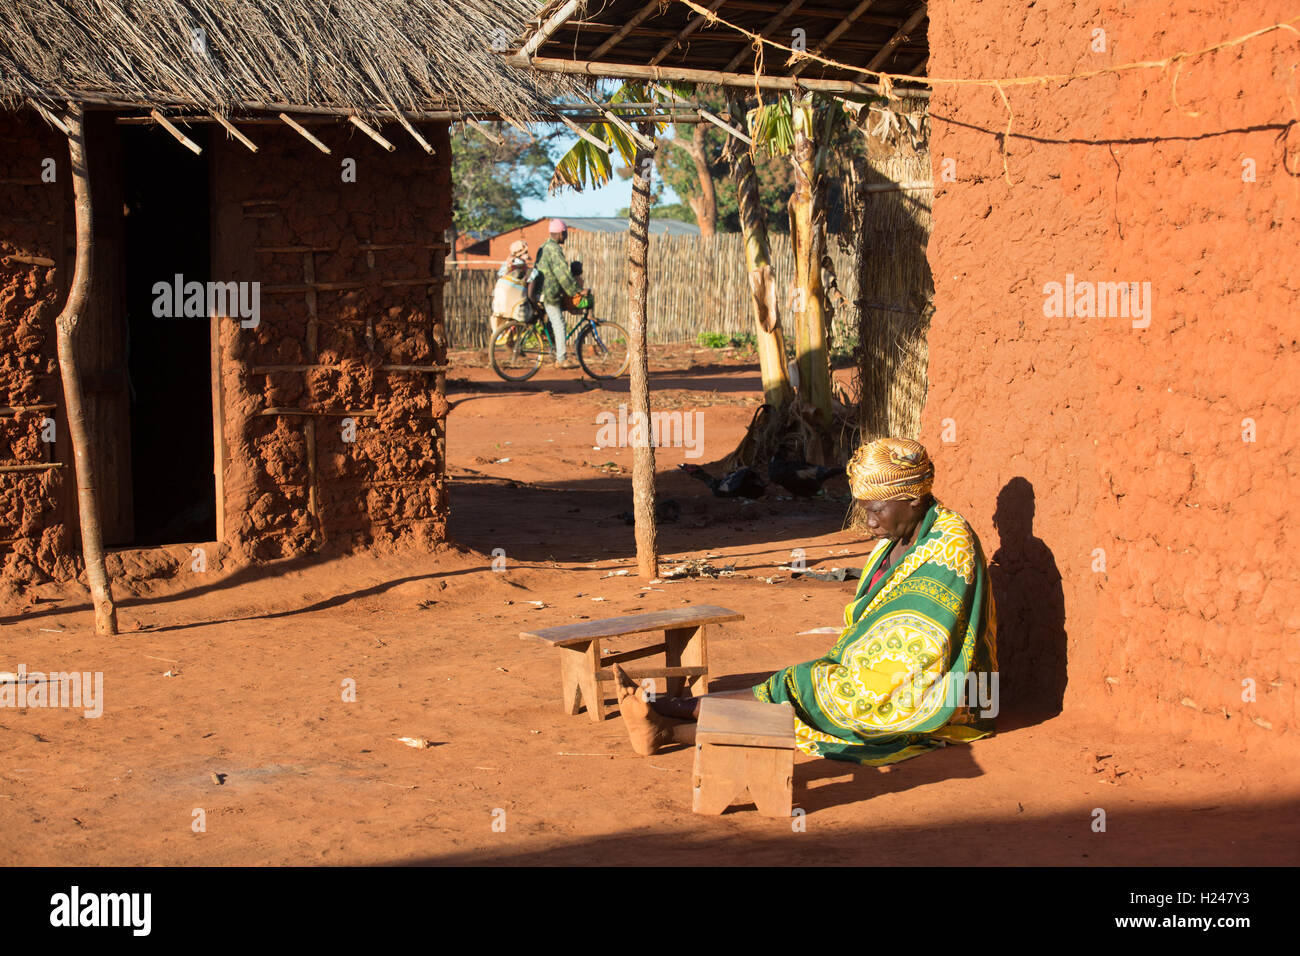 Namina village, Nampula Province, Mozambique, August 2015:  Maria Albino, 42, at home. She is blind with bilateral cataracts and needs help to do most tasks from her 20 year old married daughter Elsa and her sister Louisa.  Photo by Mike Goldwater Stock Photo